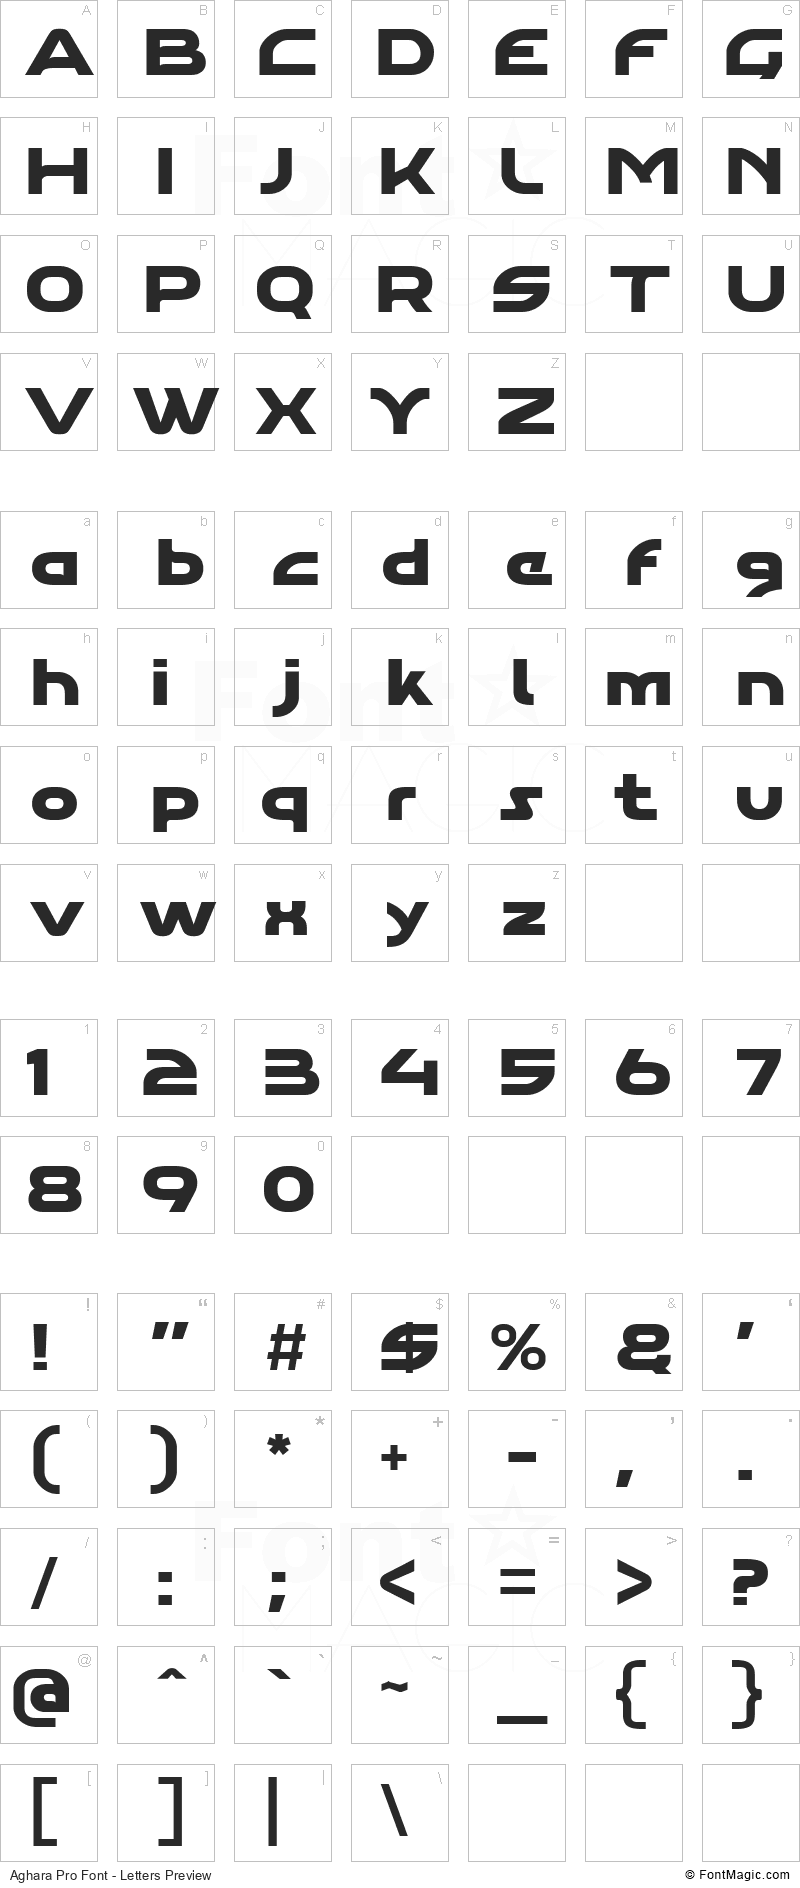 Aghara Pro Font - All Latters Preview Chart